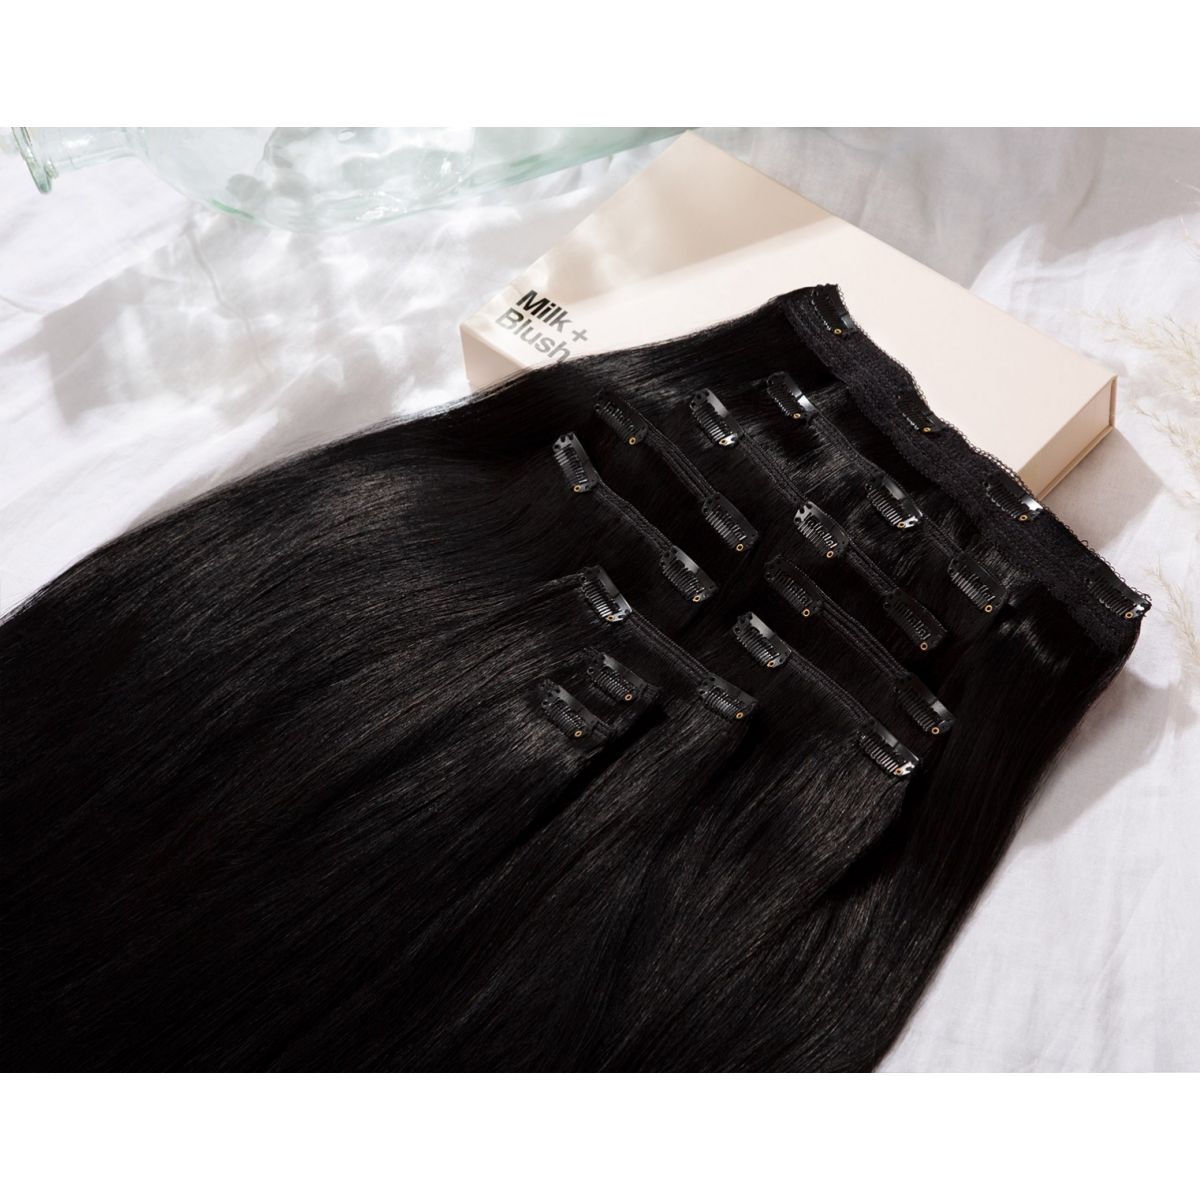 Synthetic Long Straight Black Weave Hair Extensions 6 Bundles with Closure  Women | eBay